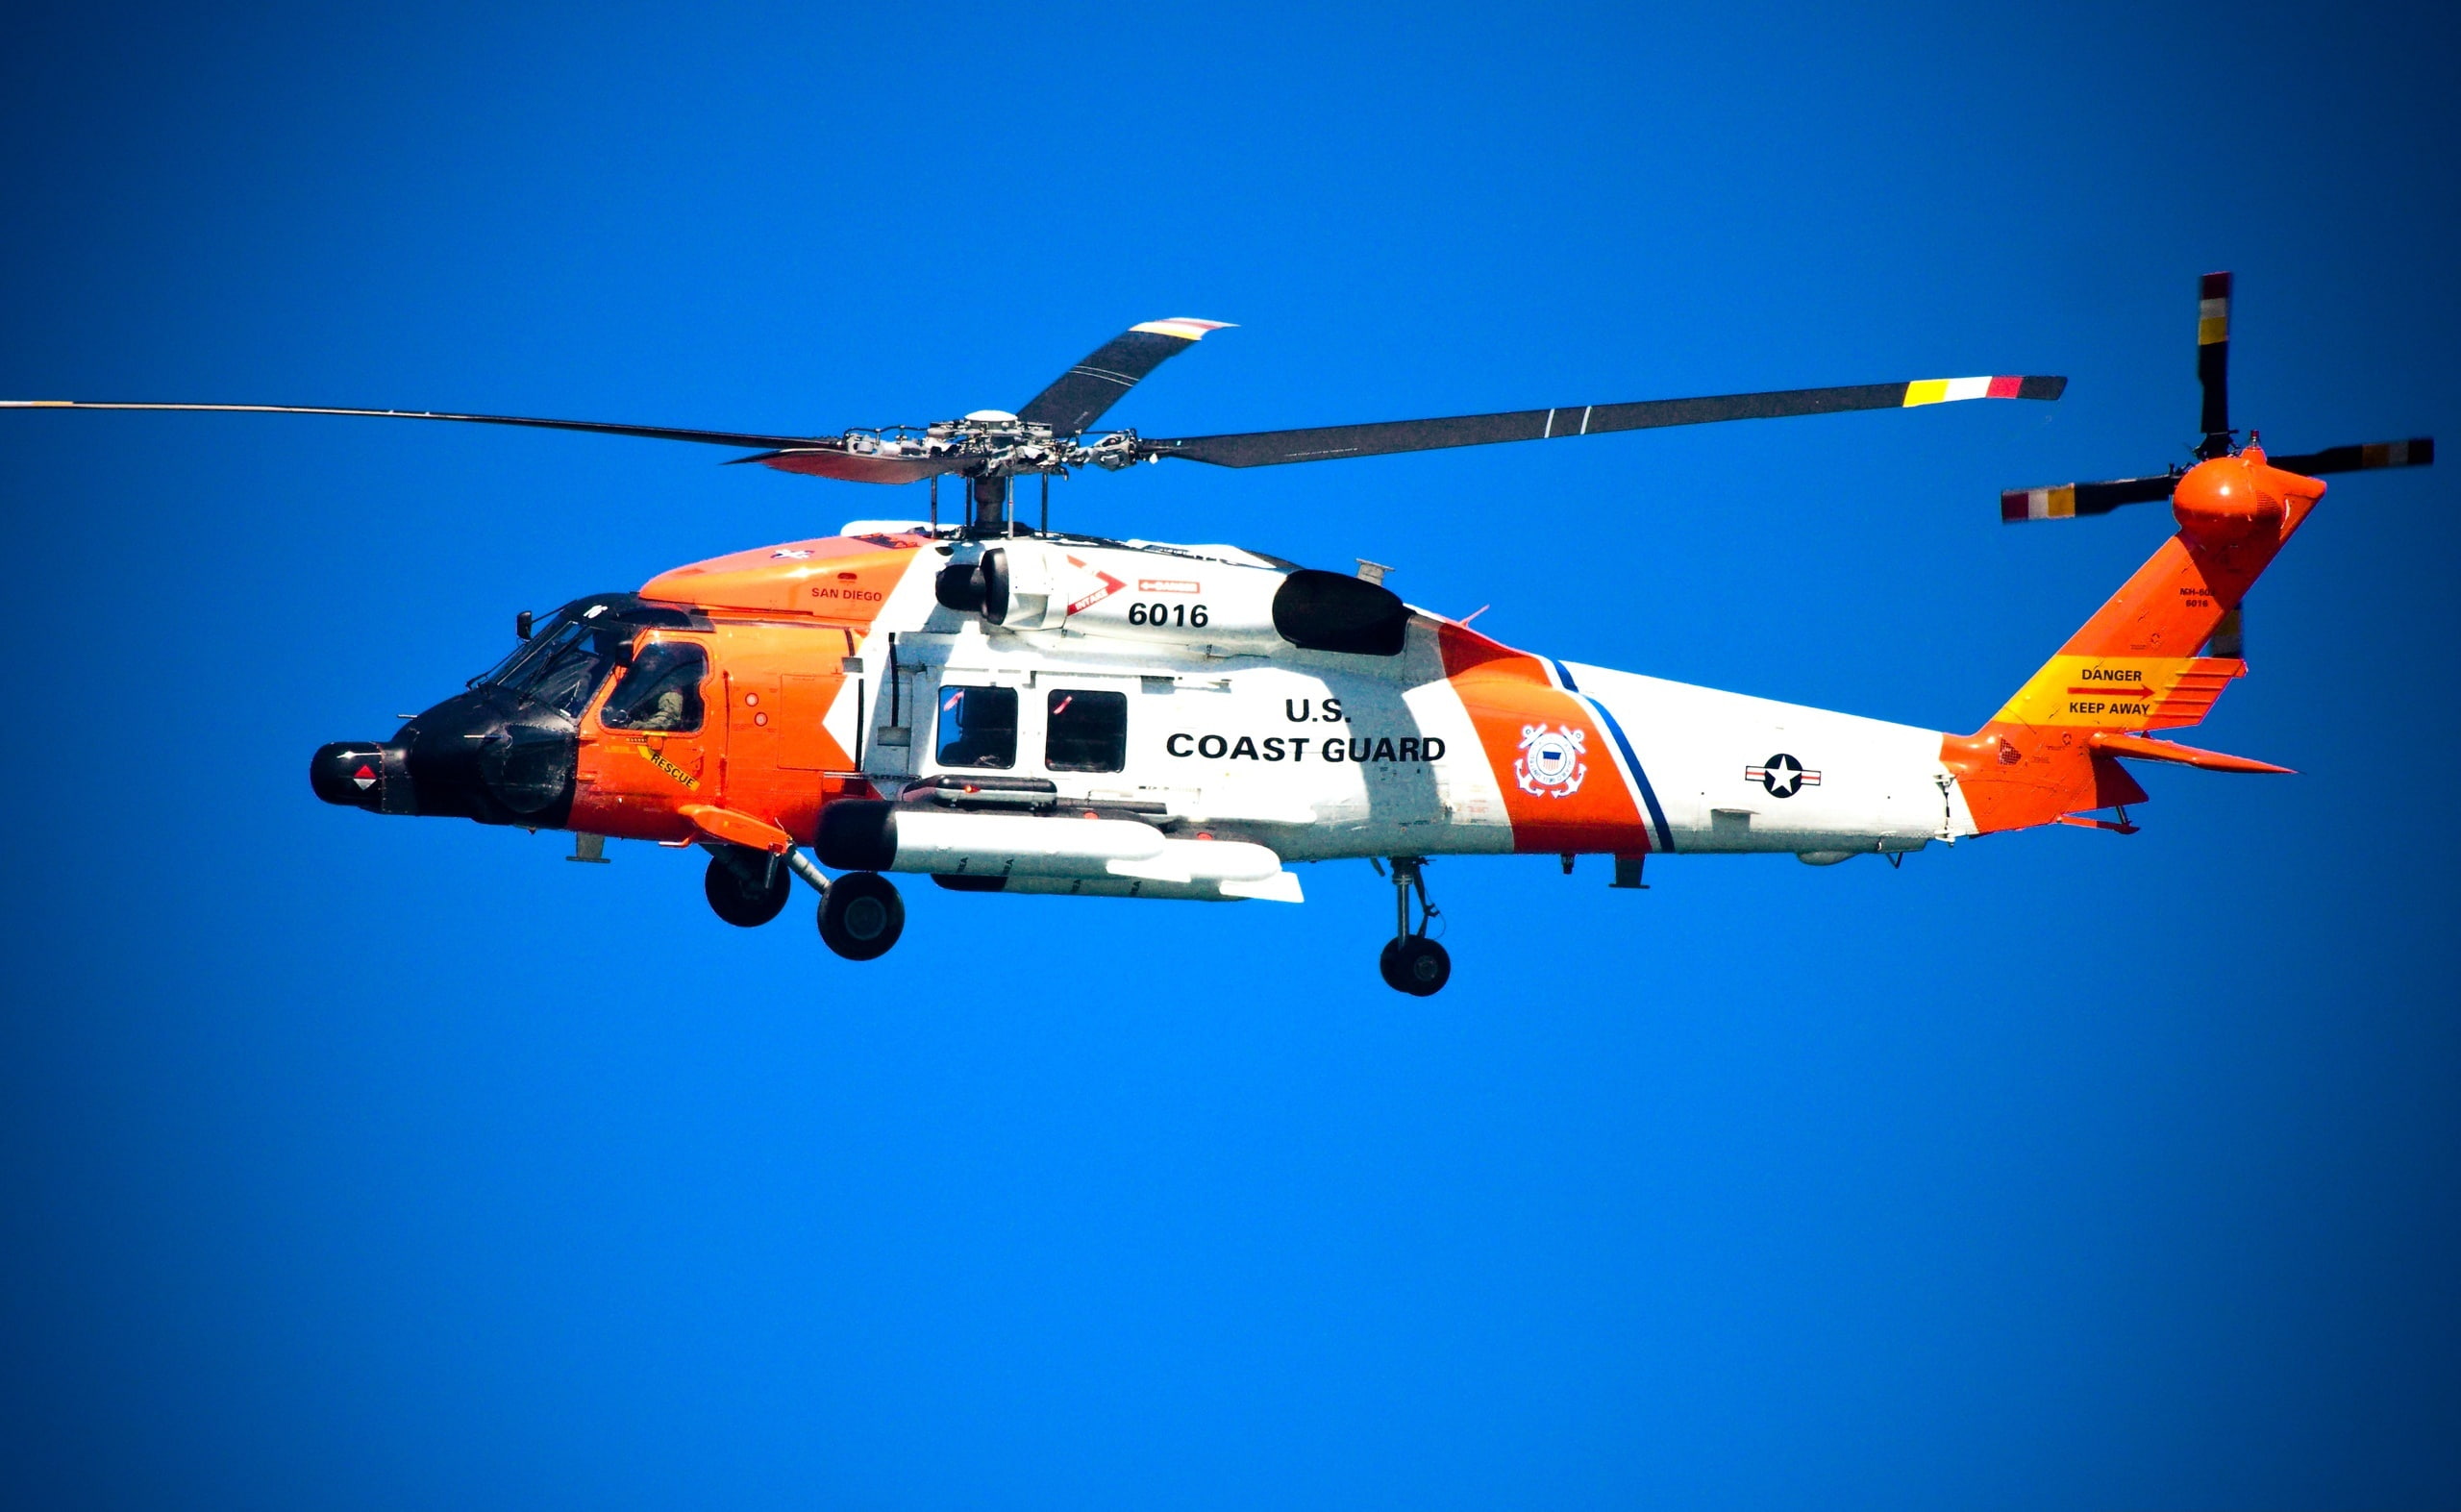 US Coast Guard Helicopter, white and orange Coast Guard helicopter